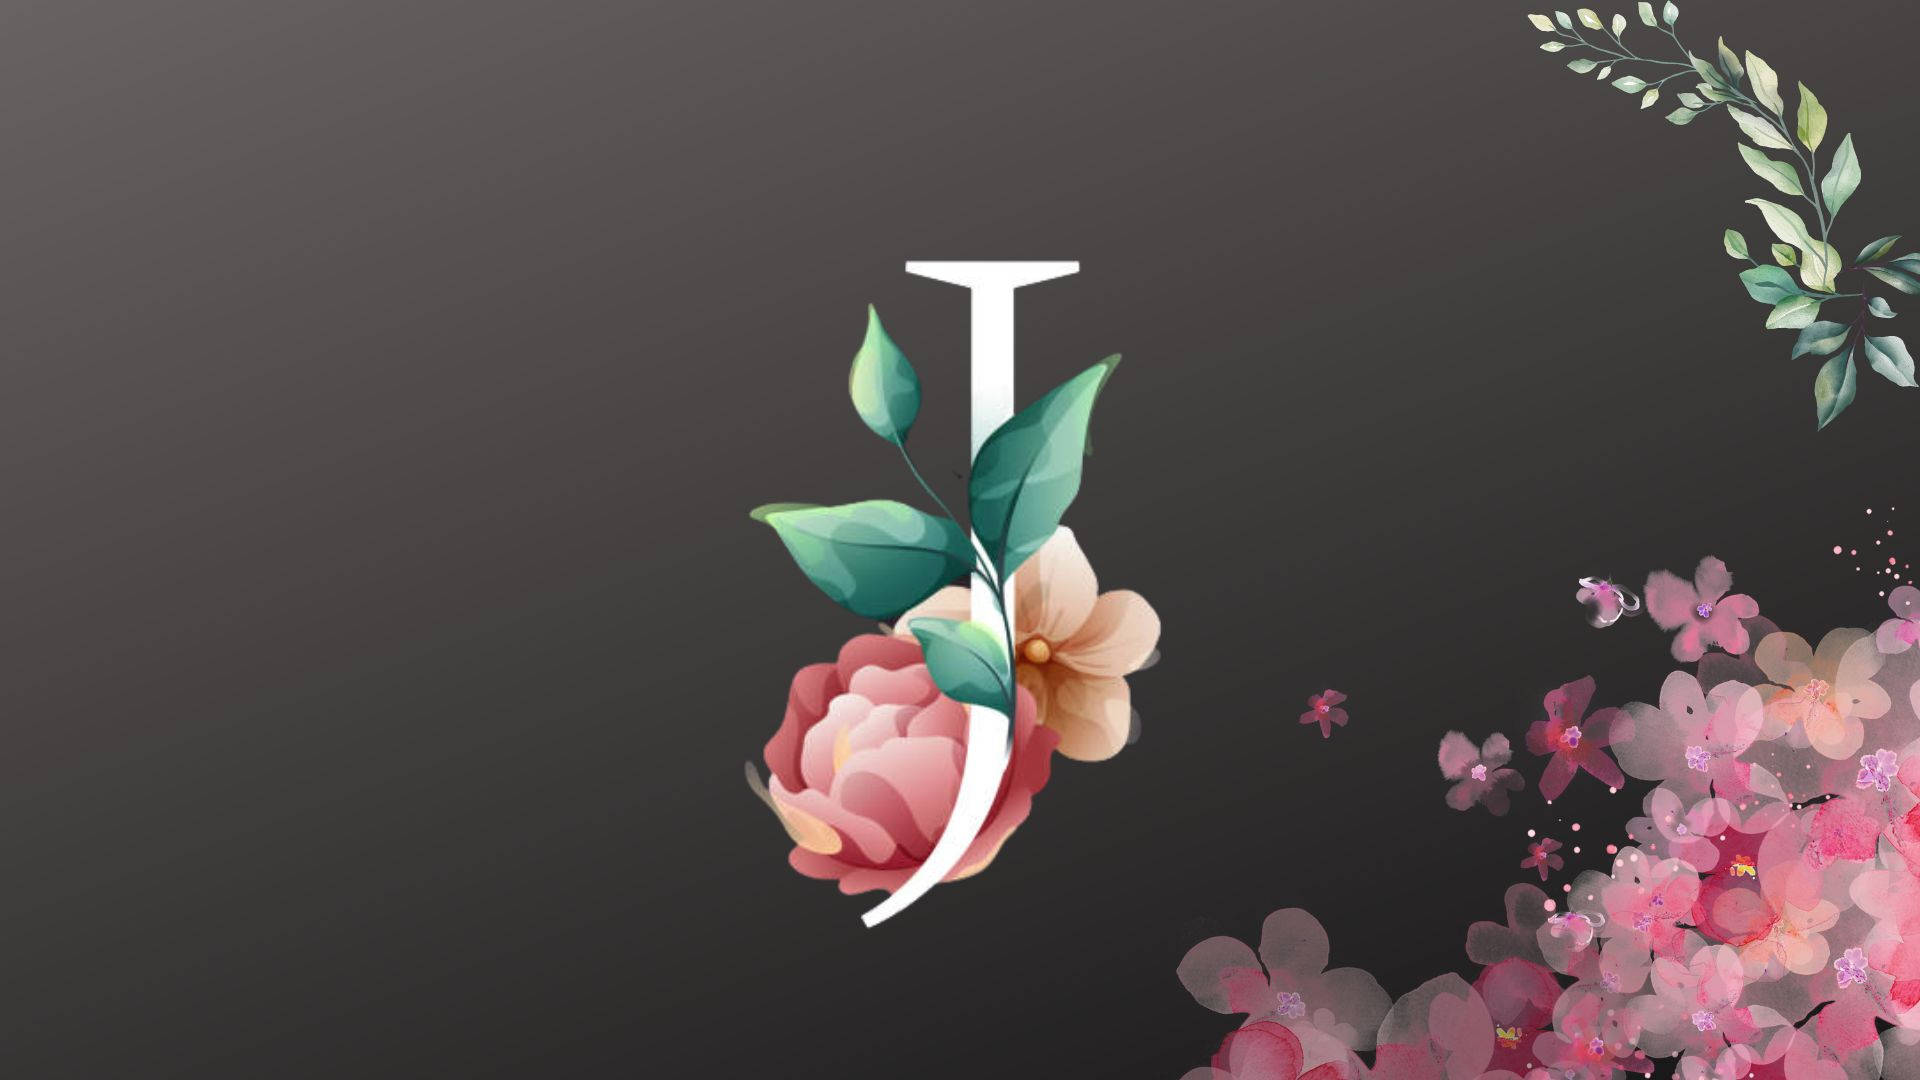 Watercolor Flowers And Letter J Wallpaper